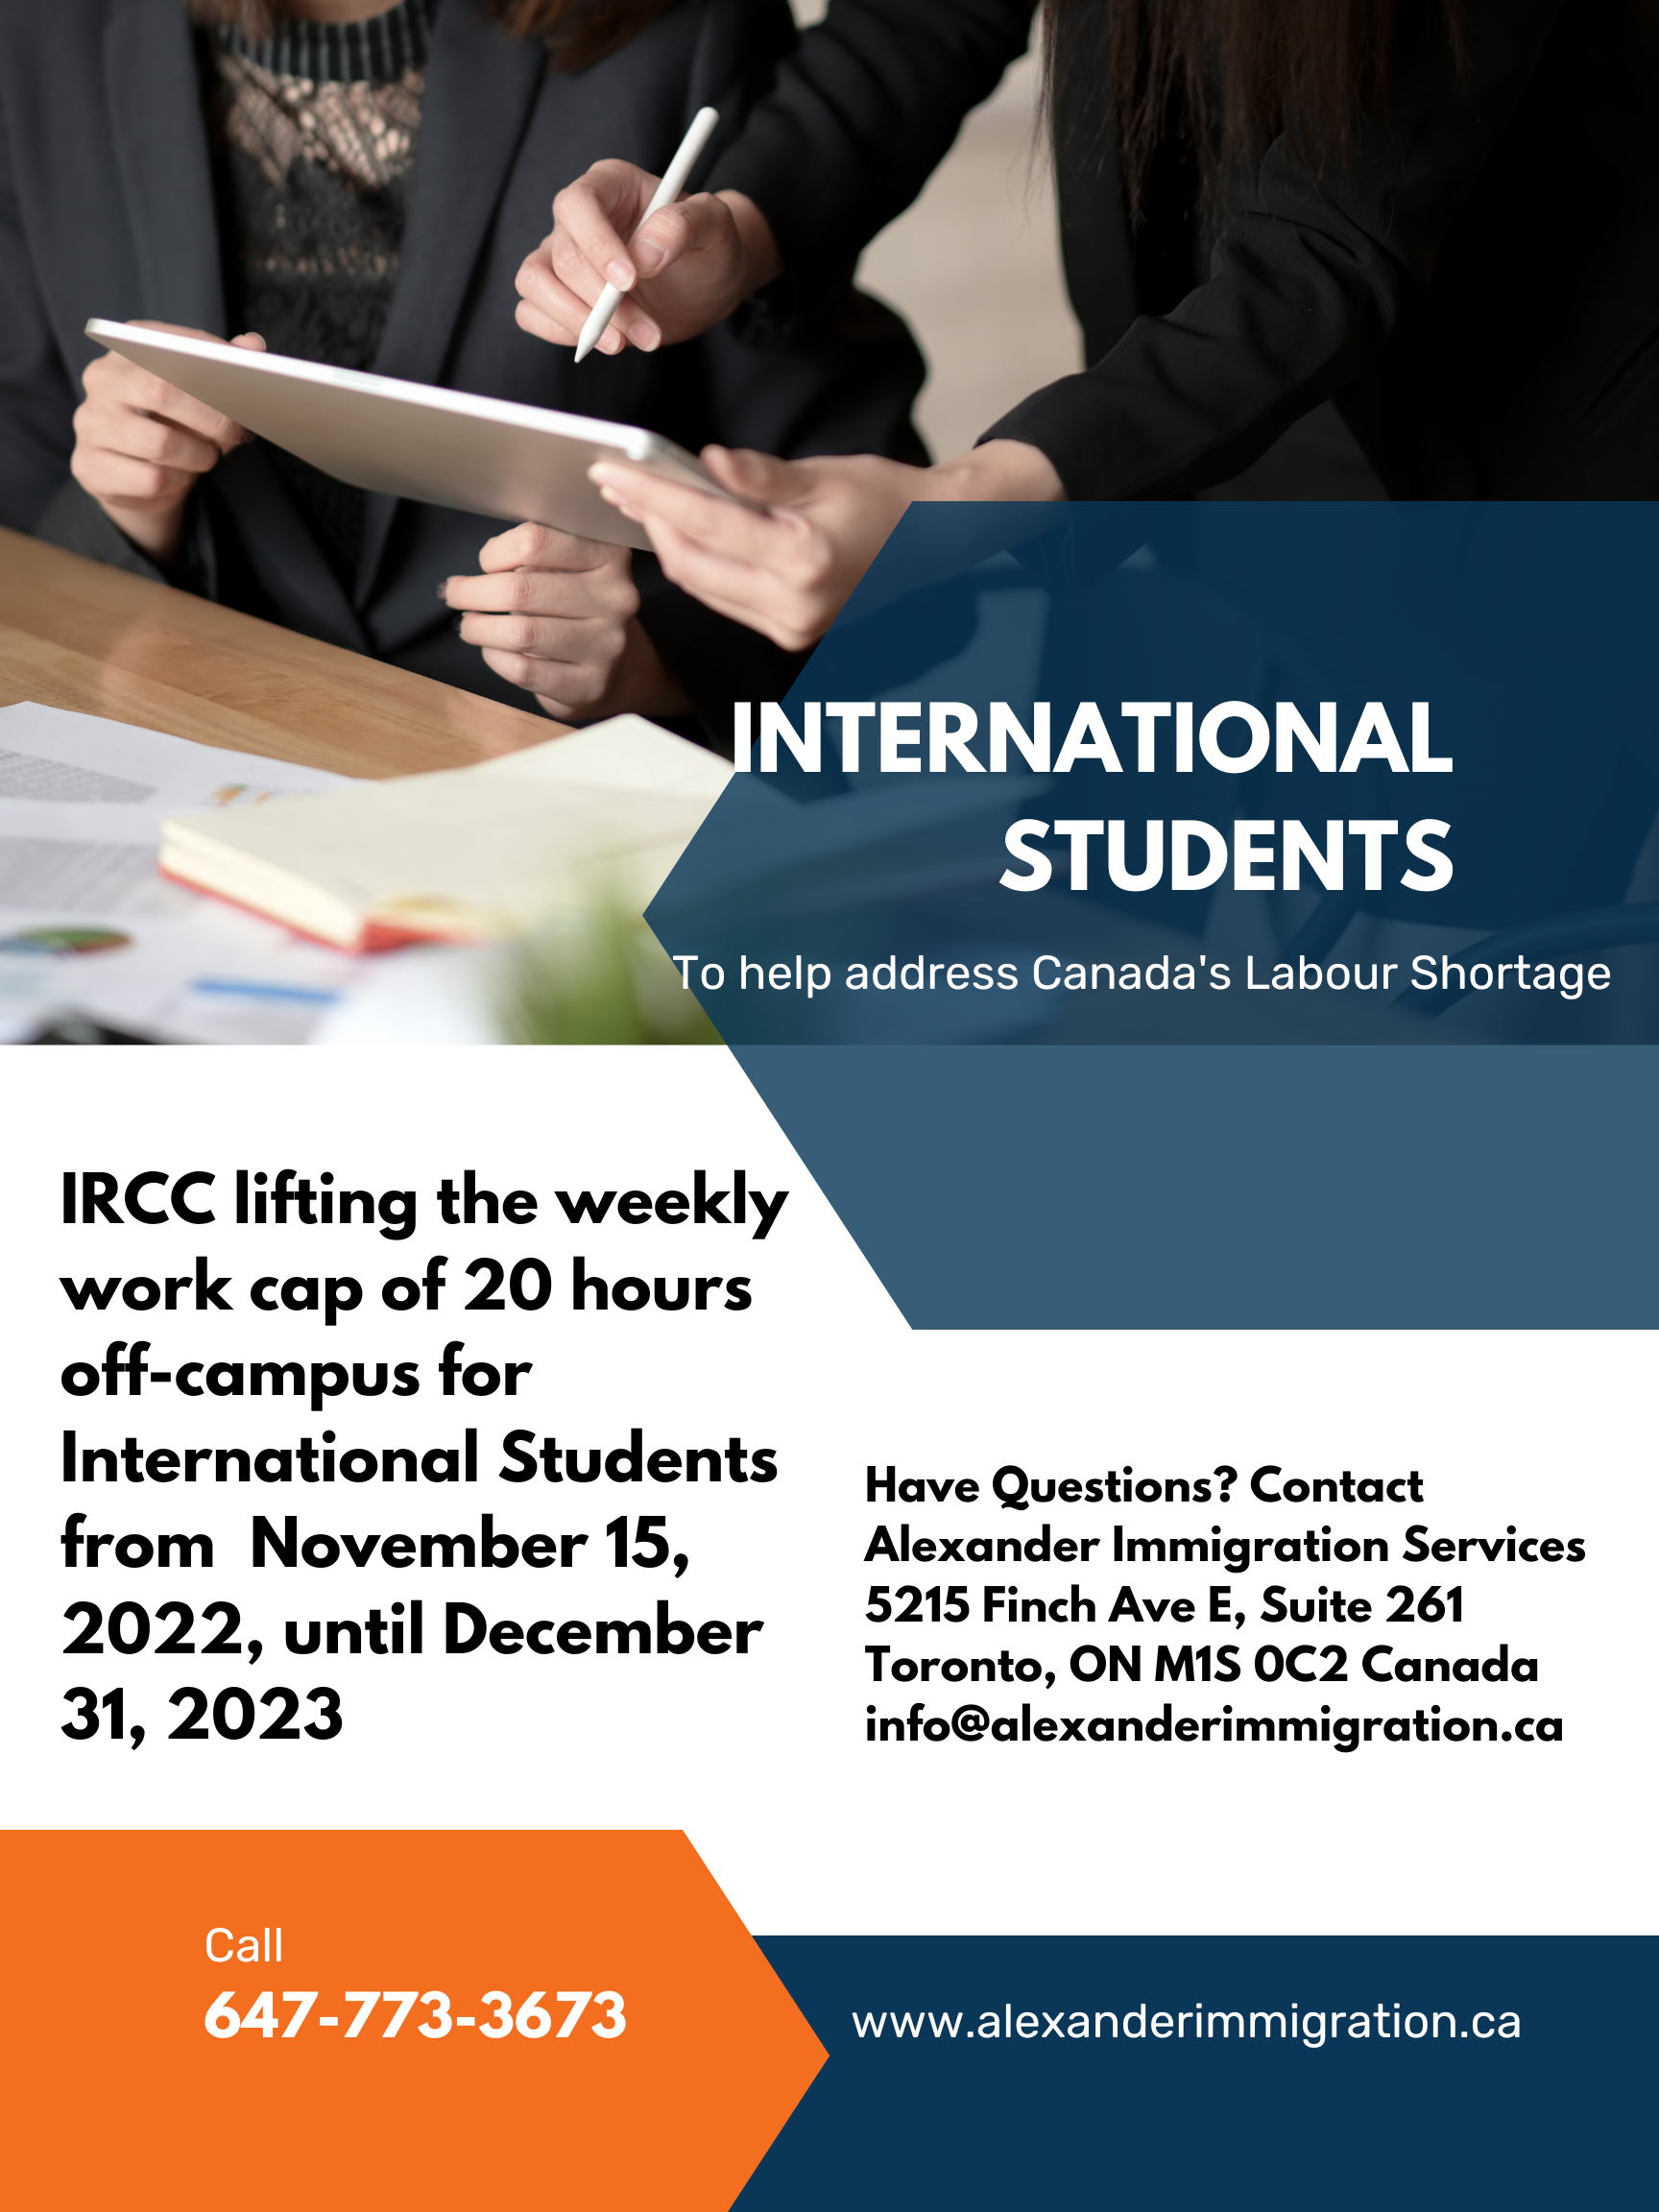 International Students can work off-campus over 20 hours